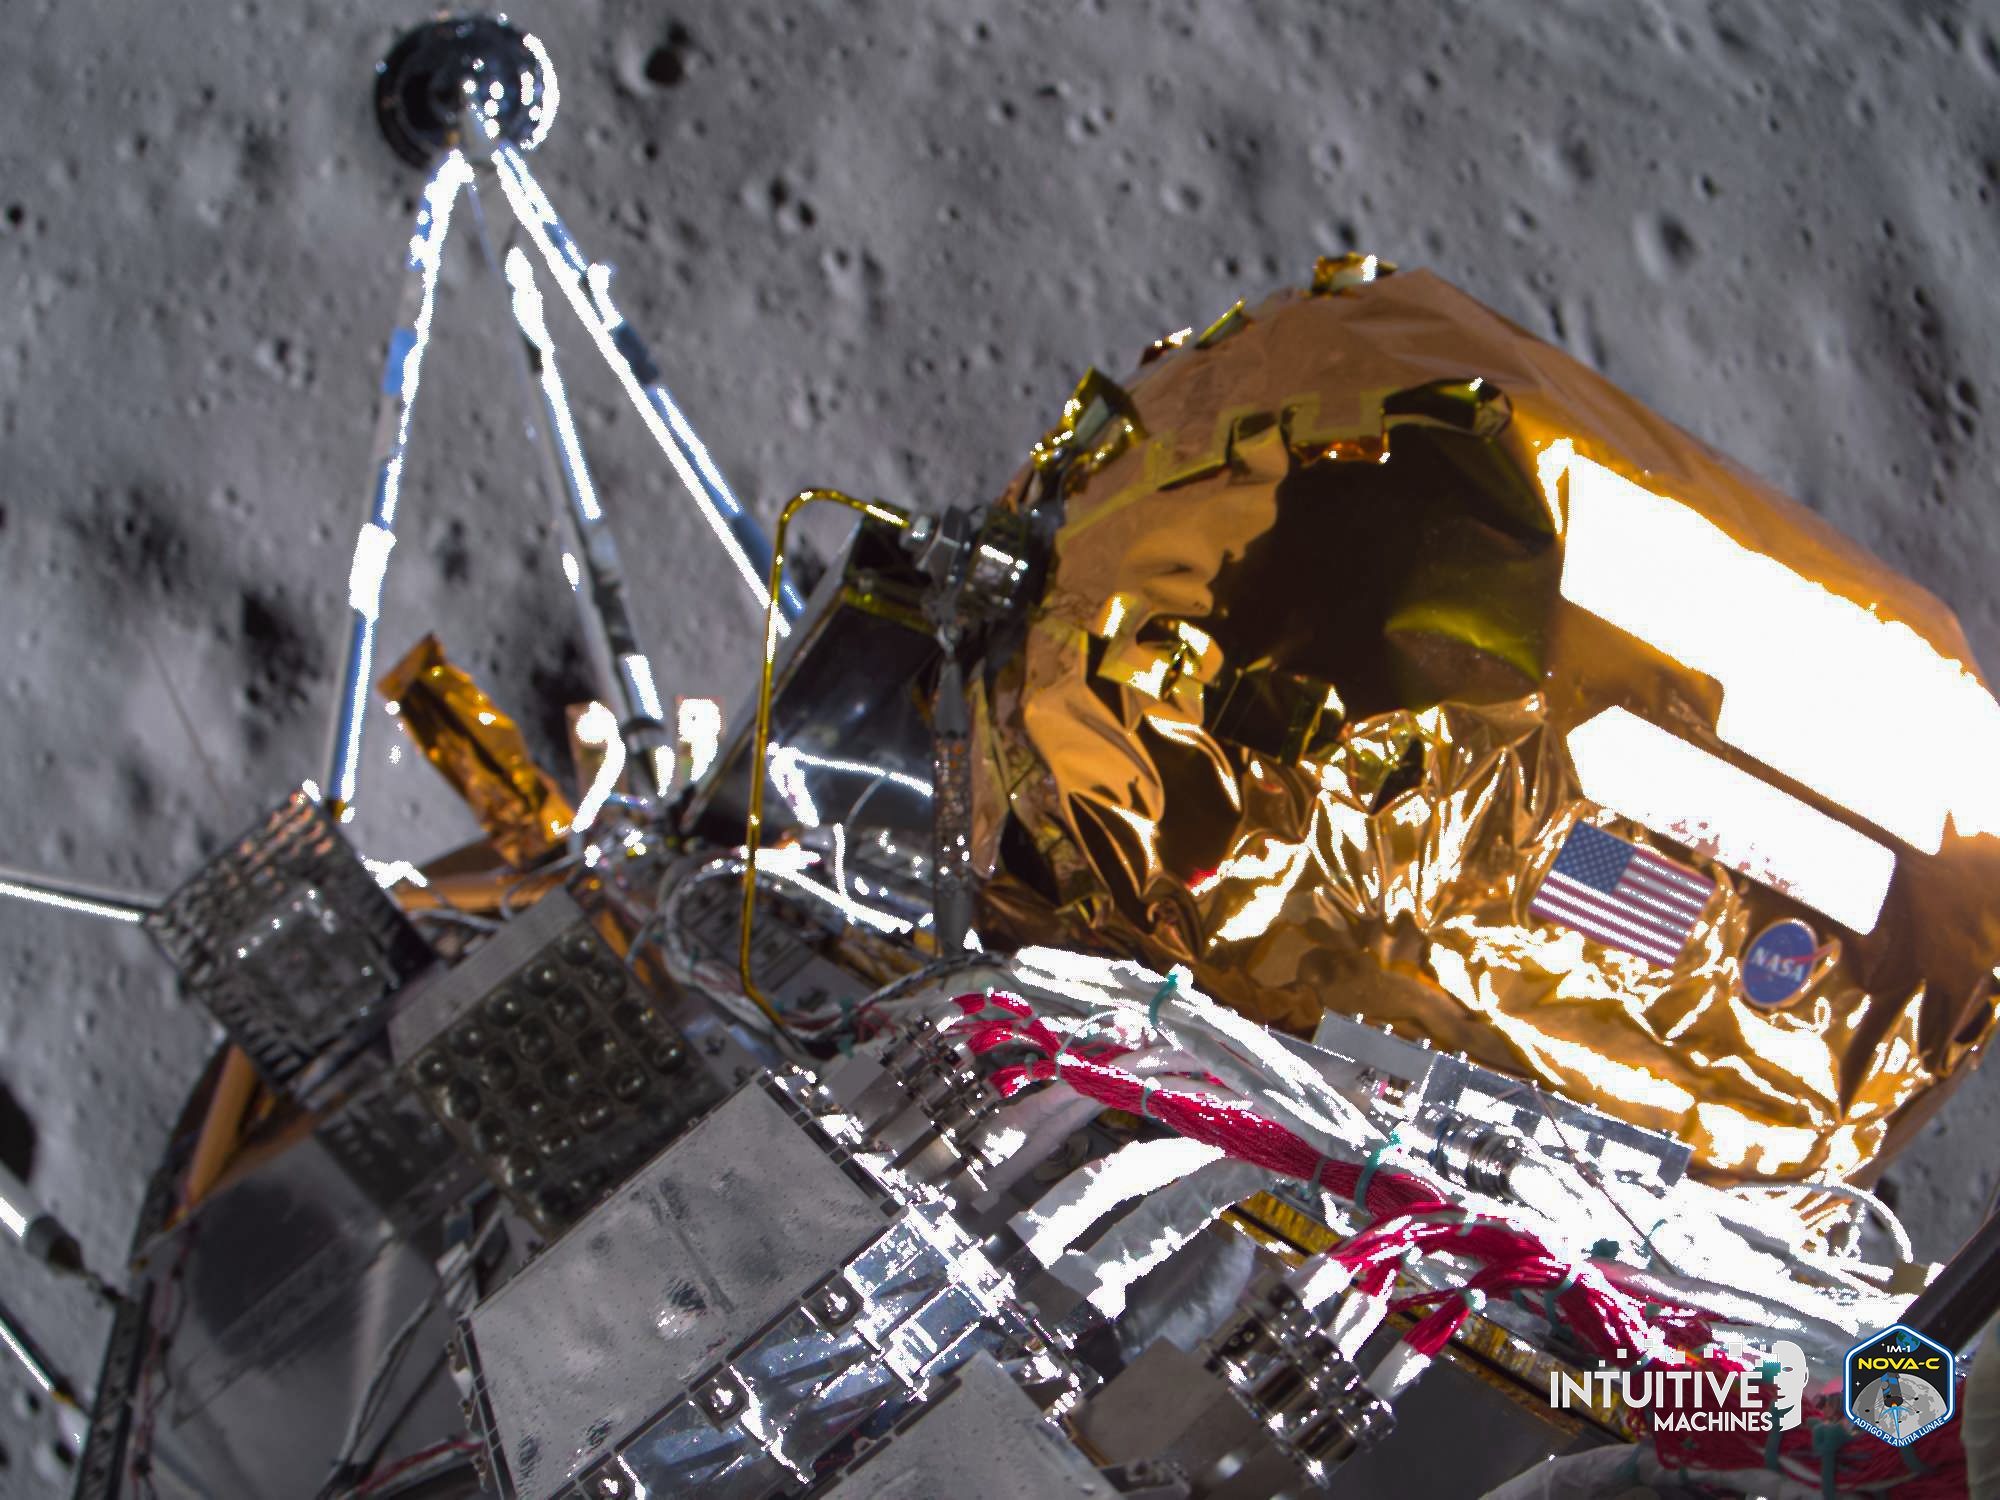 The Odysseus Moon Lander Won’t “Call Home” but Second Moon Mission Is On Track For 2024